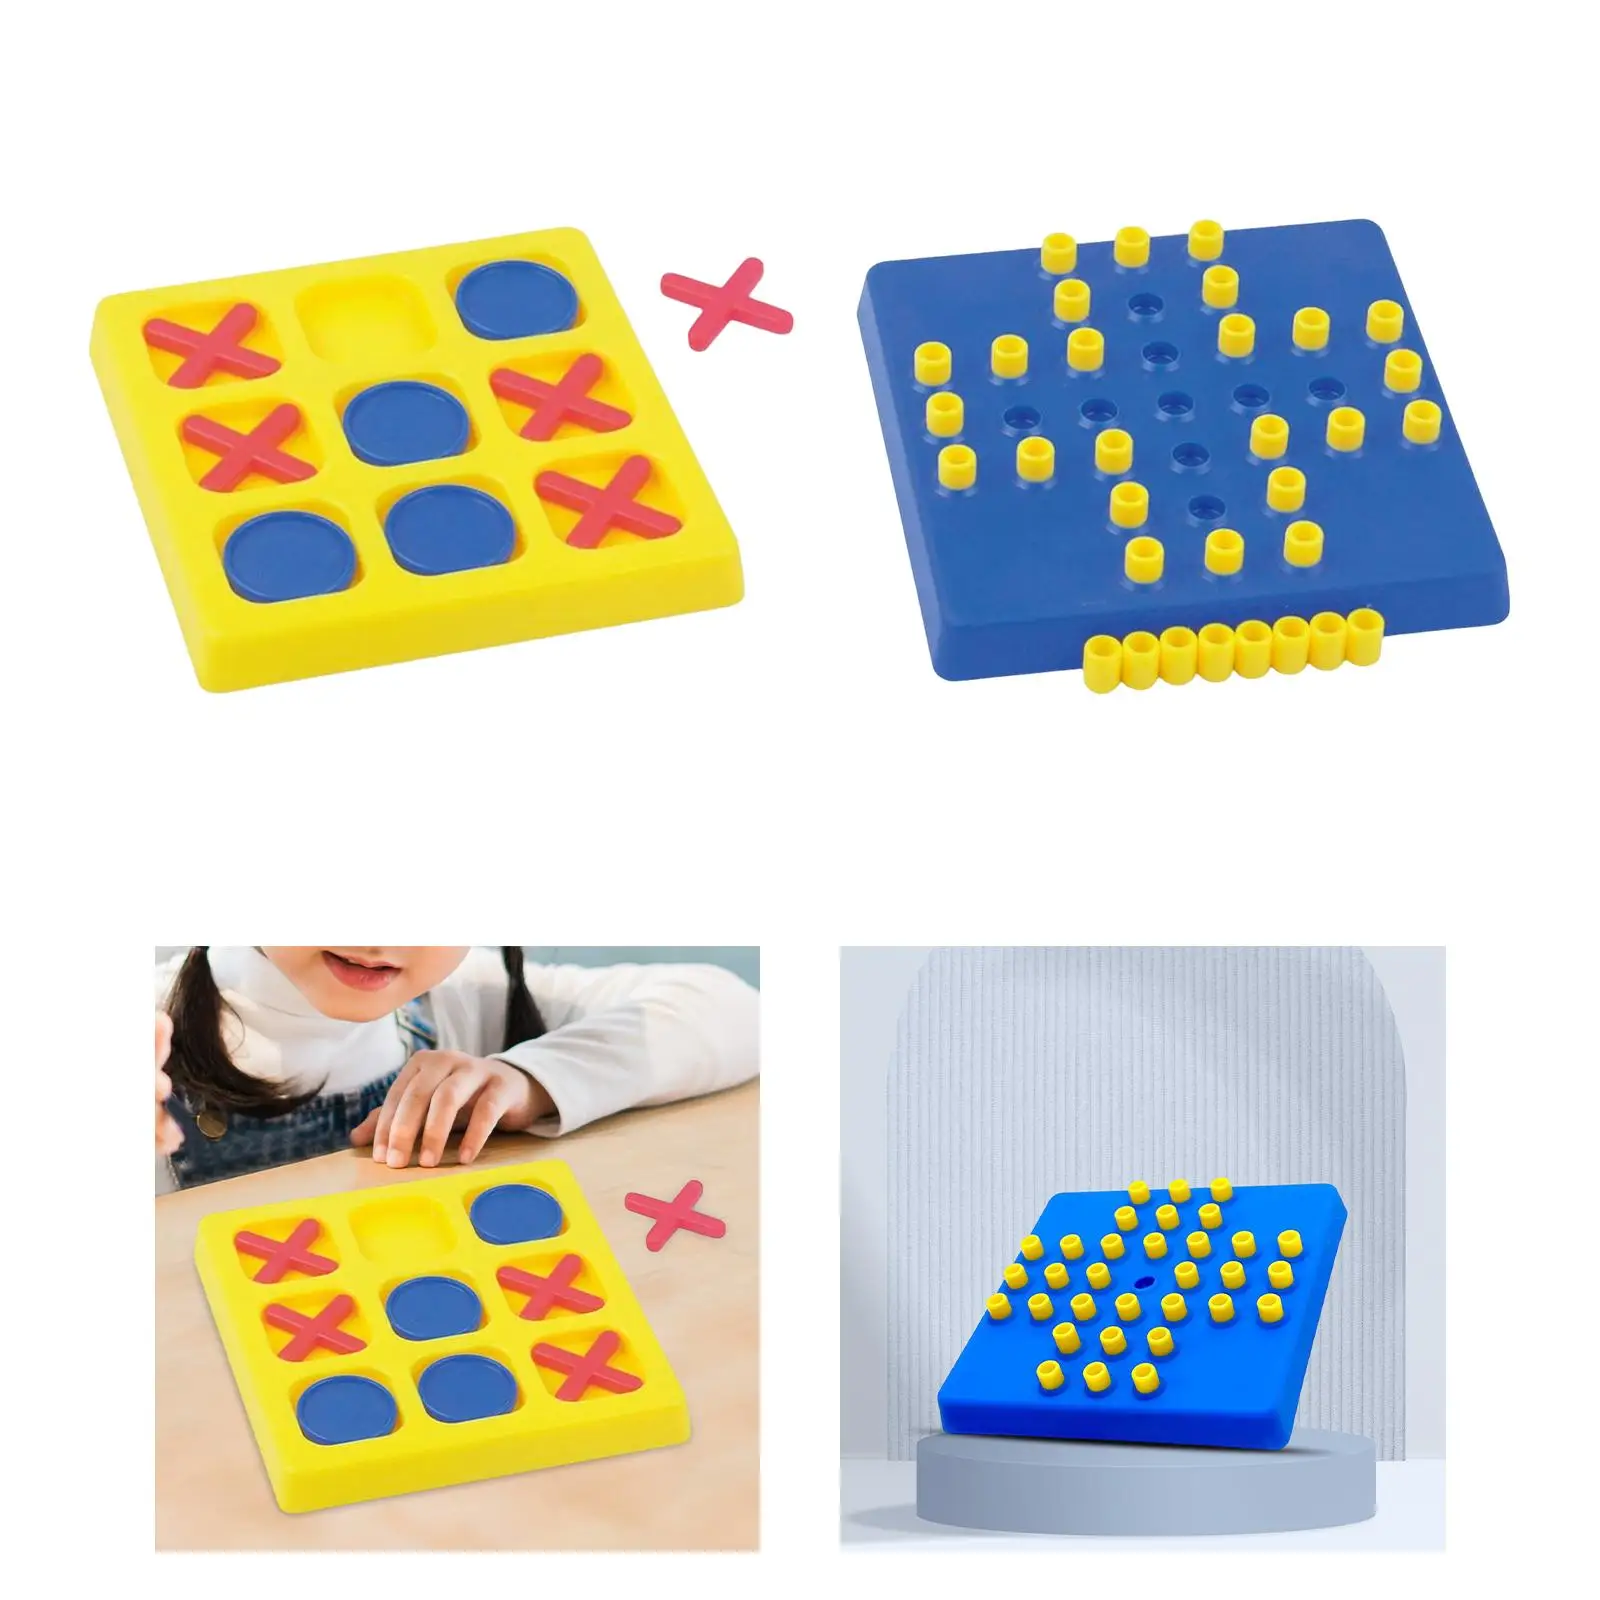 Puzzle Marble Solitaire Board Game Leisure IQ Puzzle Intelligent Tic TAC Toe O Chess for Backyard Entertainment Age 3+